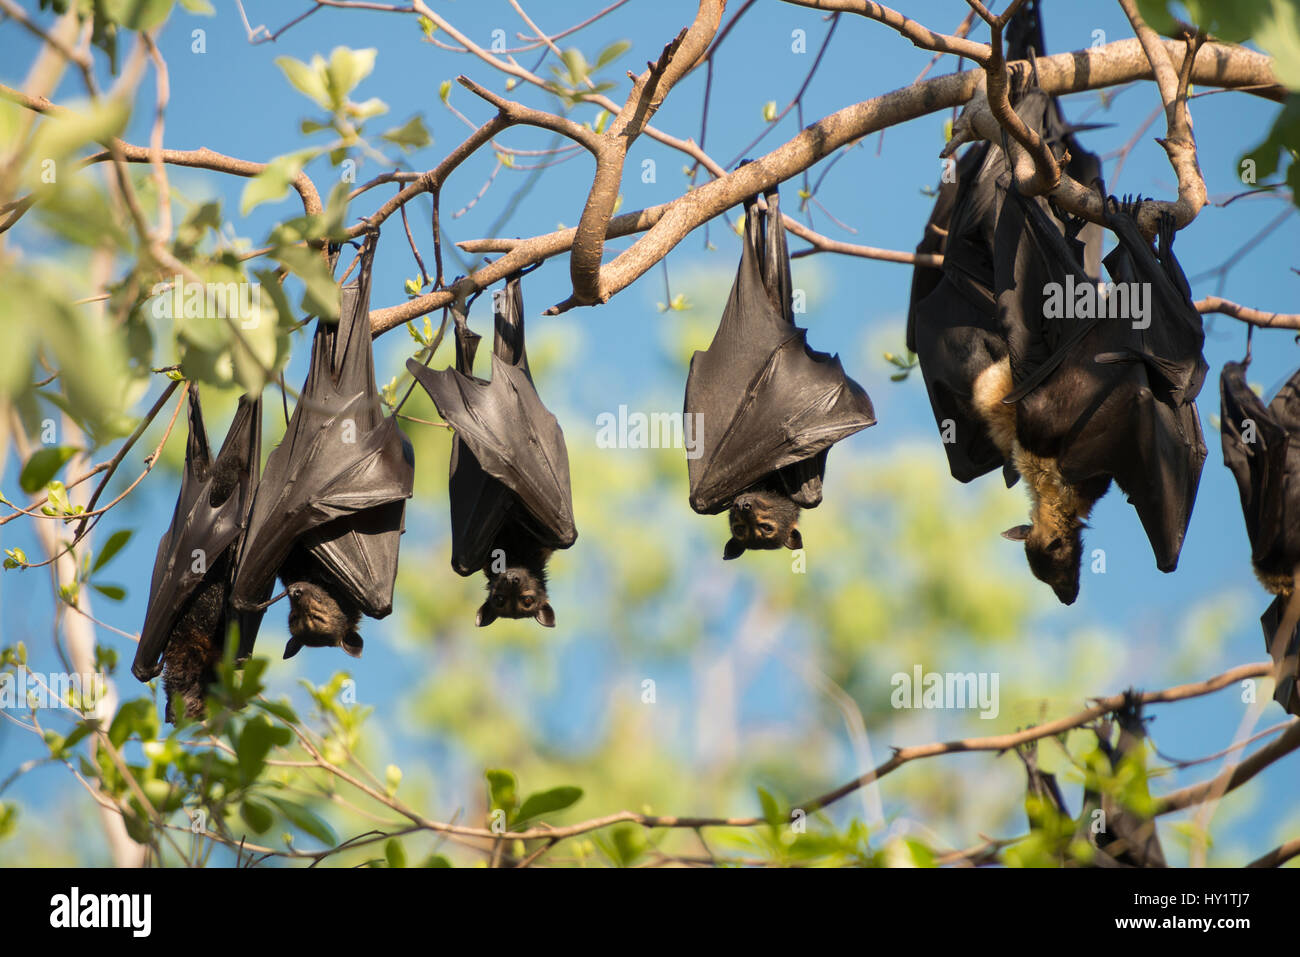 Spectacled flying fox (Pteropus conspicillatus) colony roosting during daytime, North Queensland, Australia, November 2012 Stock Photo